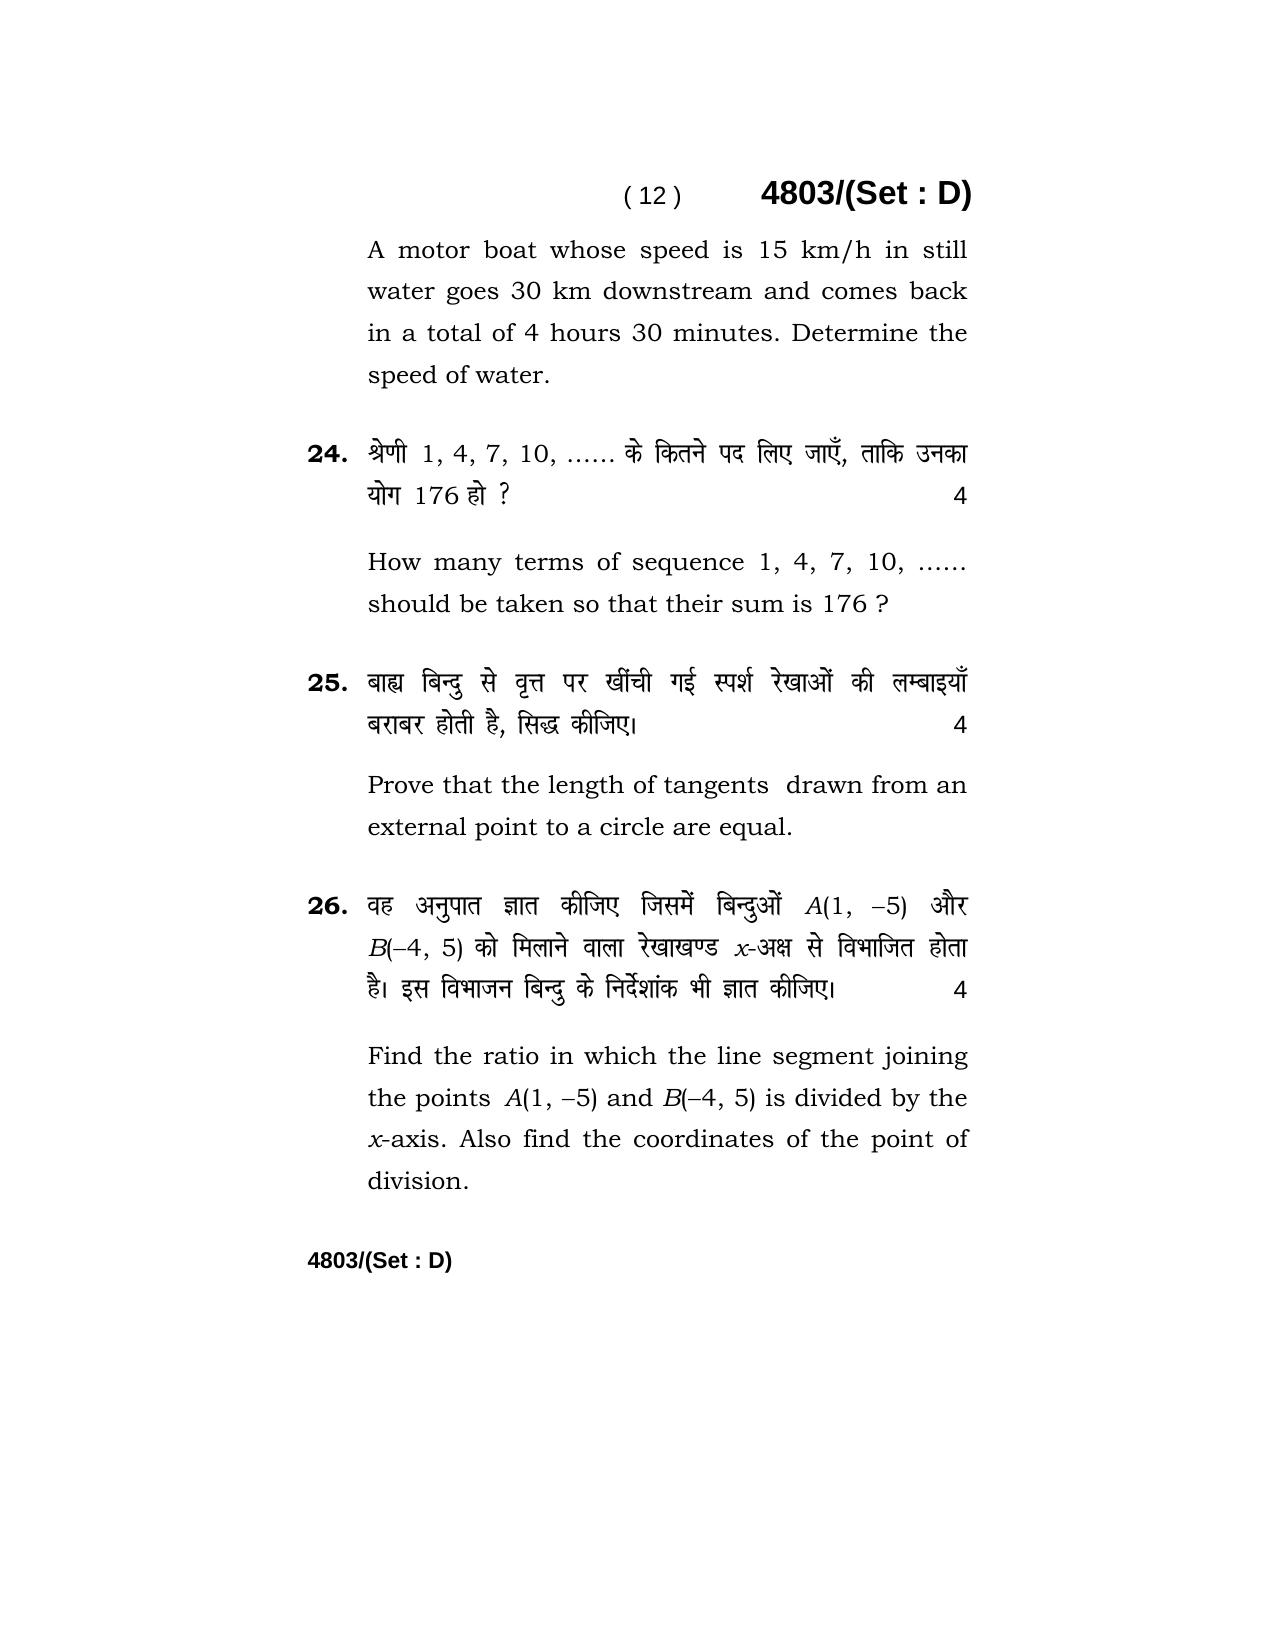 Haryana Board HBSE Class 10 Mathematics 2020 Question Paper - Page 60